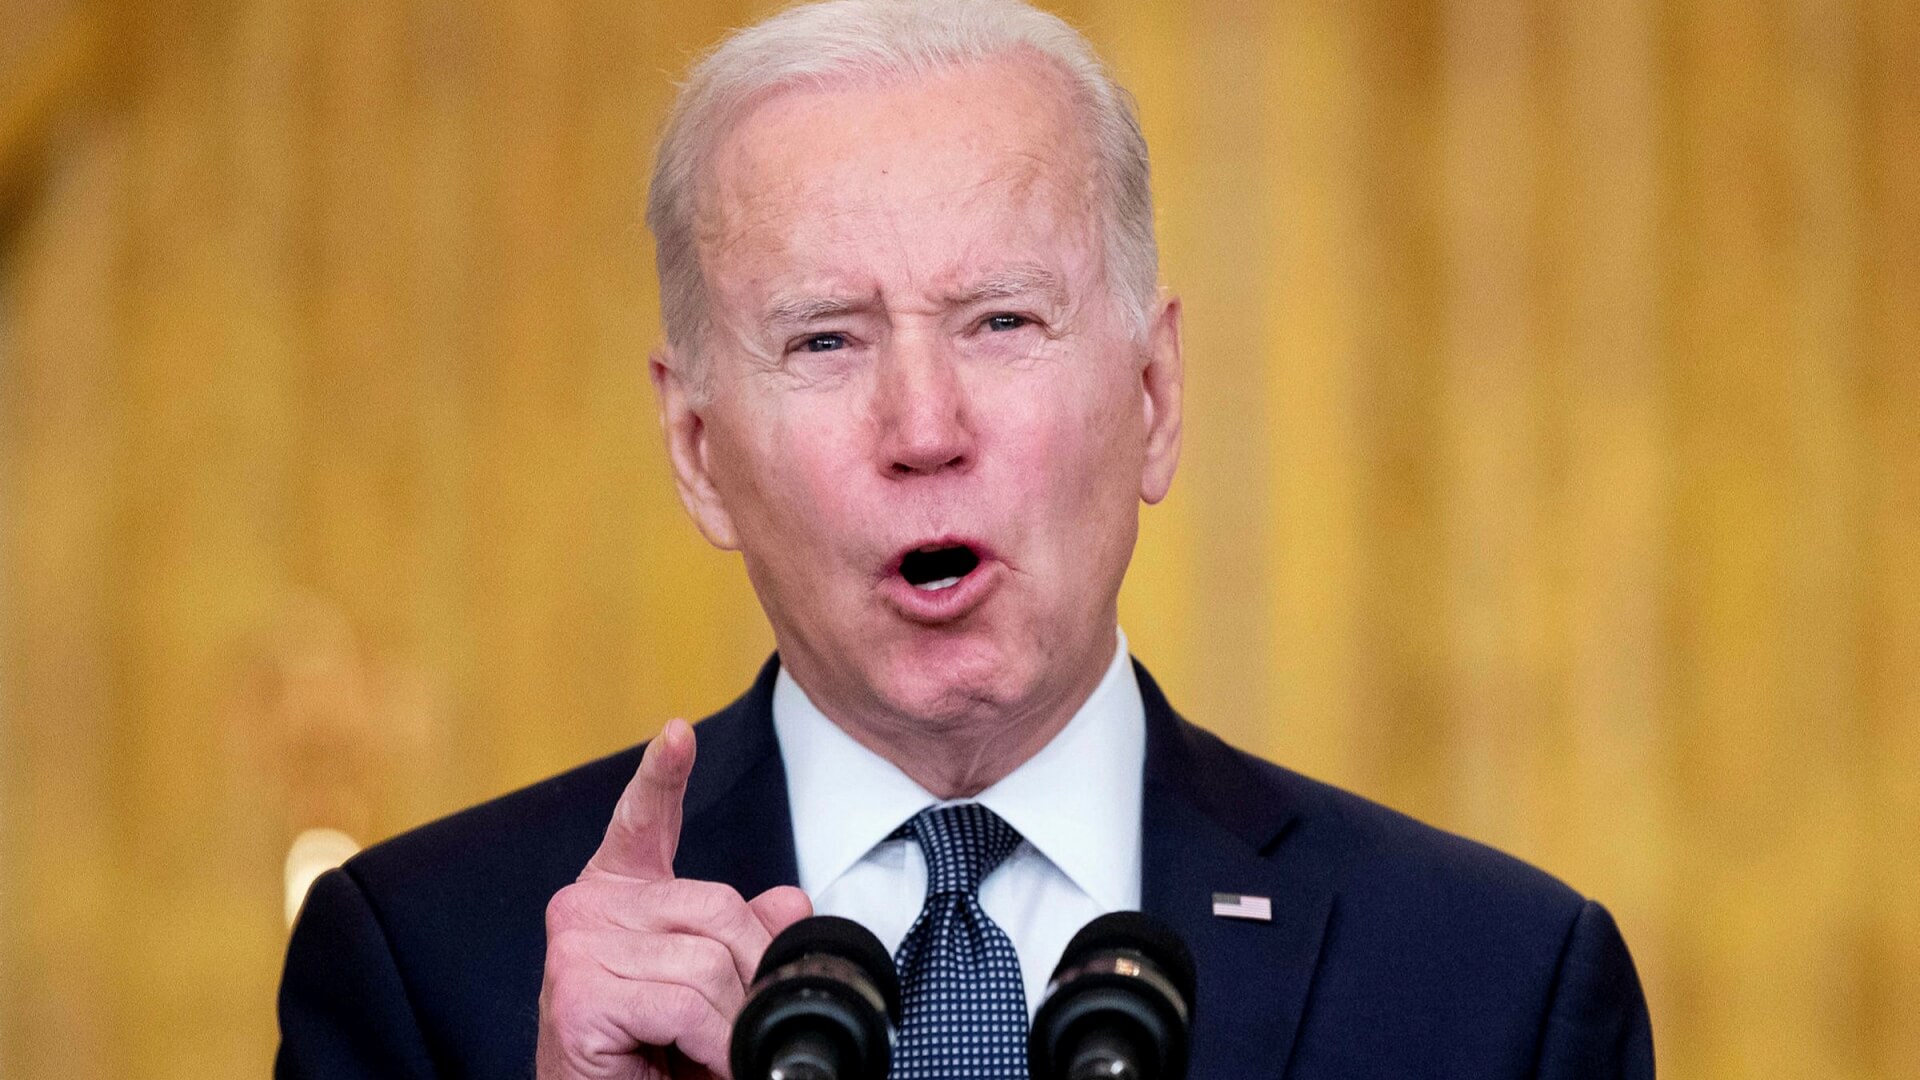 Biden Announces “Devastating” Sanctions Against Russia, Deploys 7,000 Troops to Germany